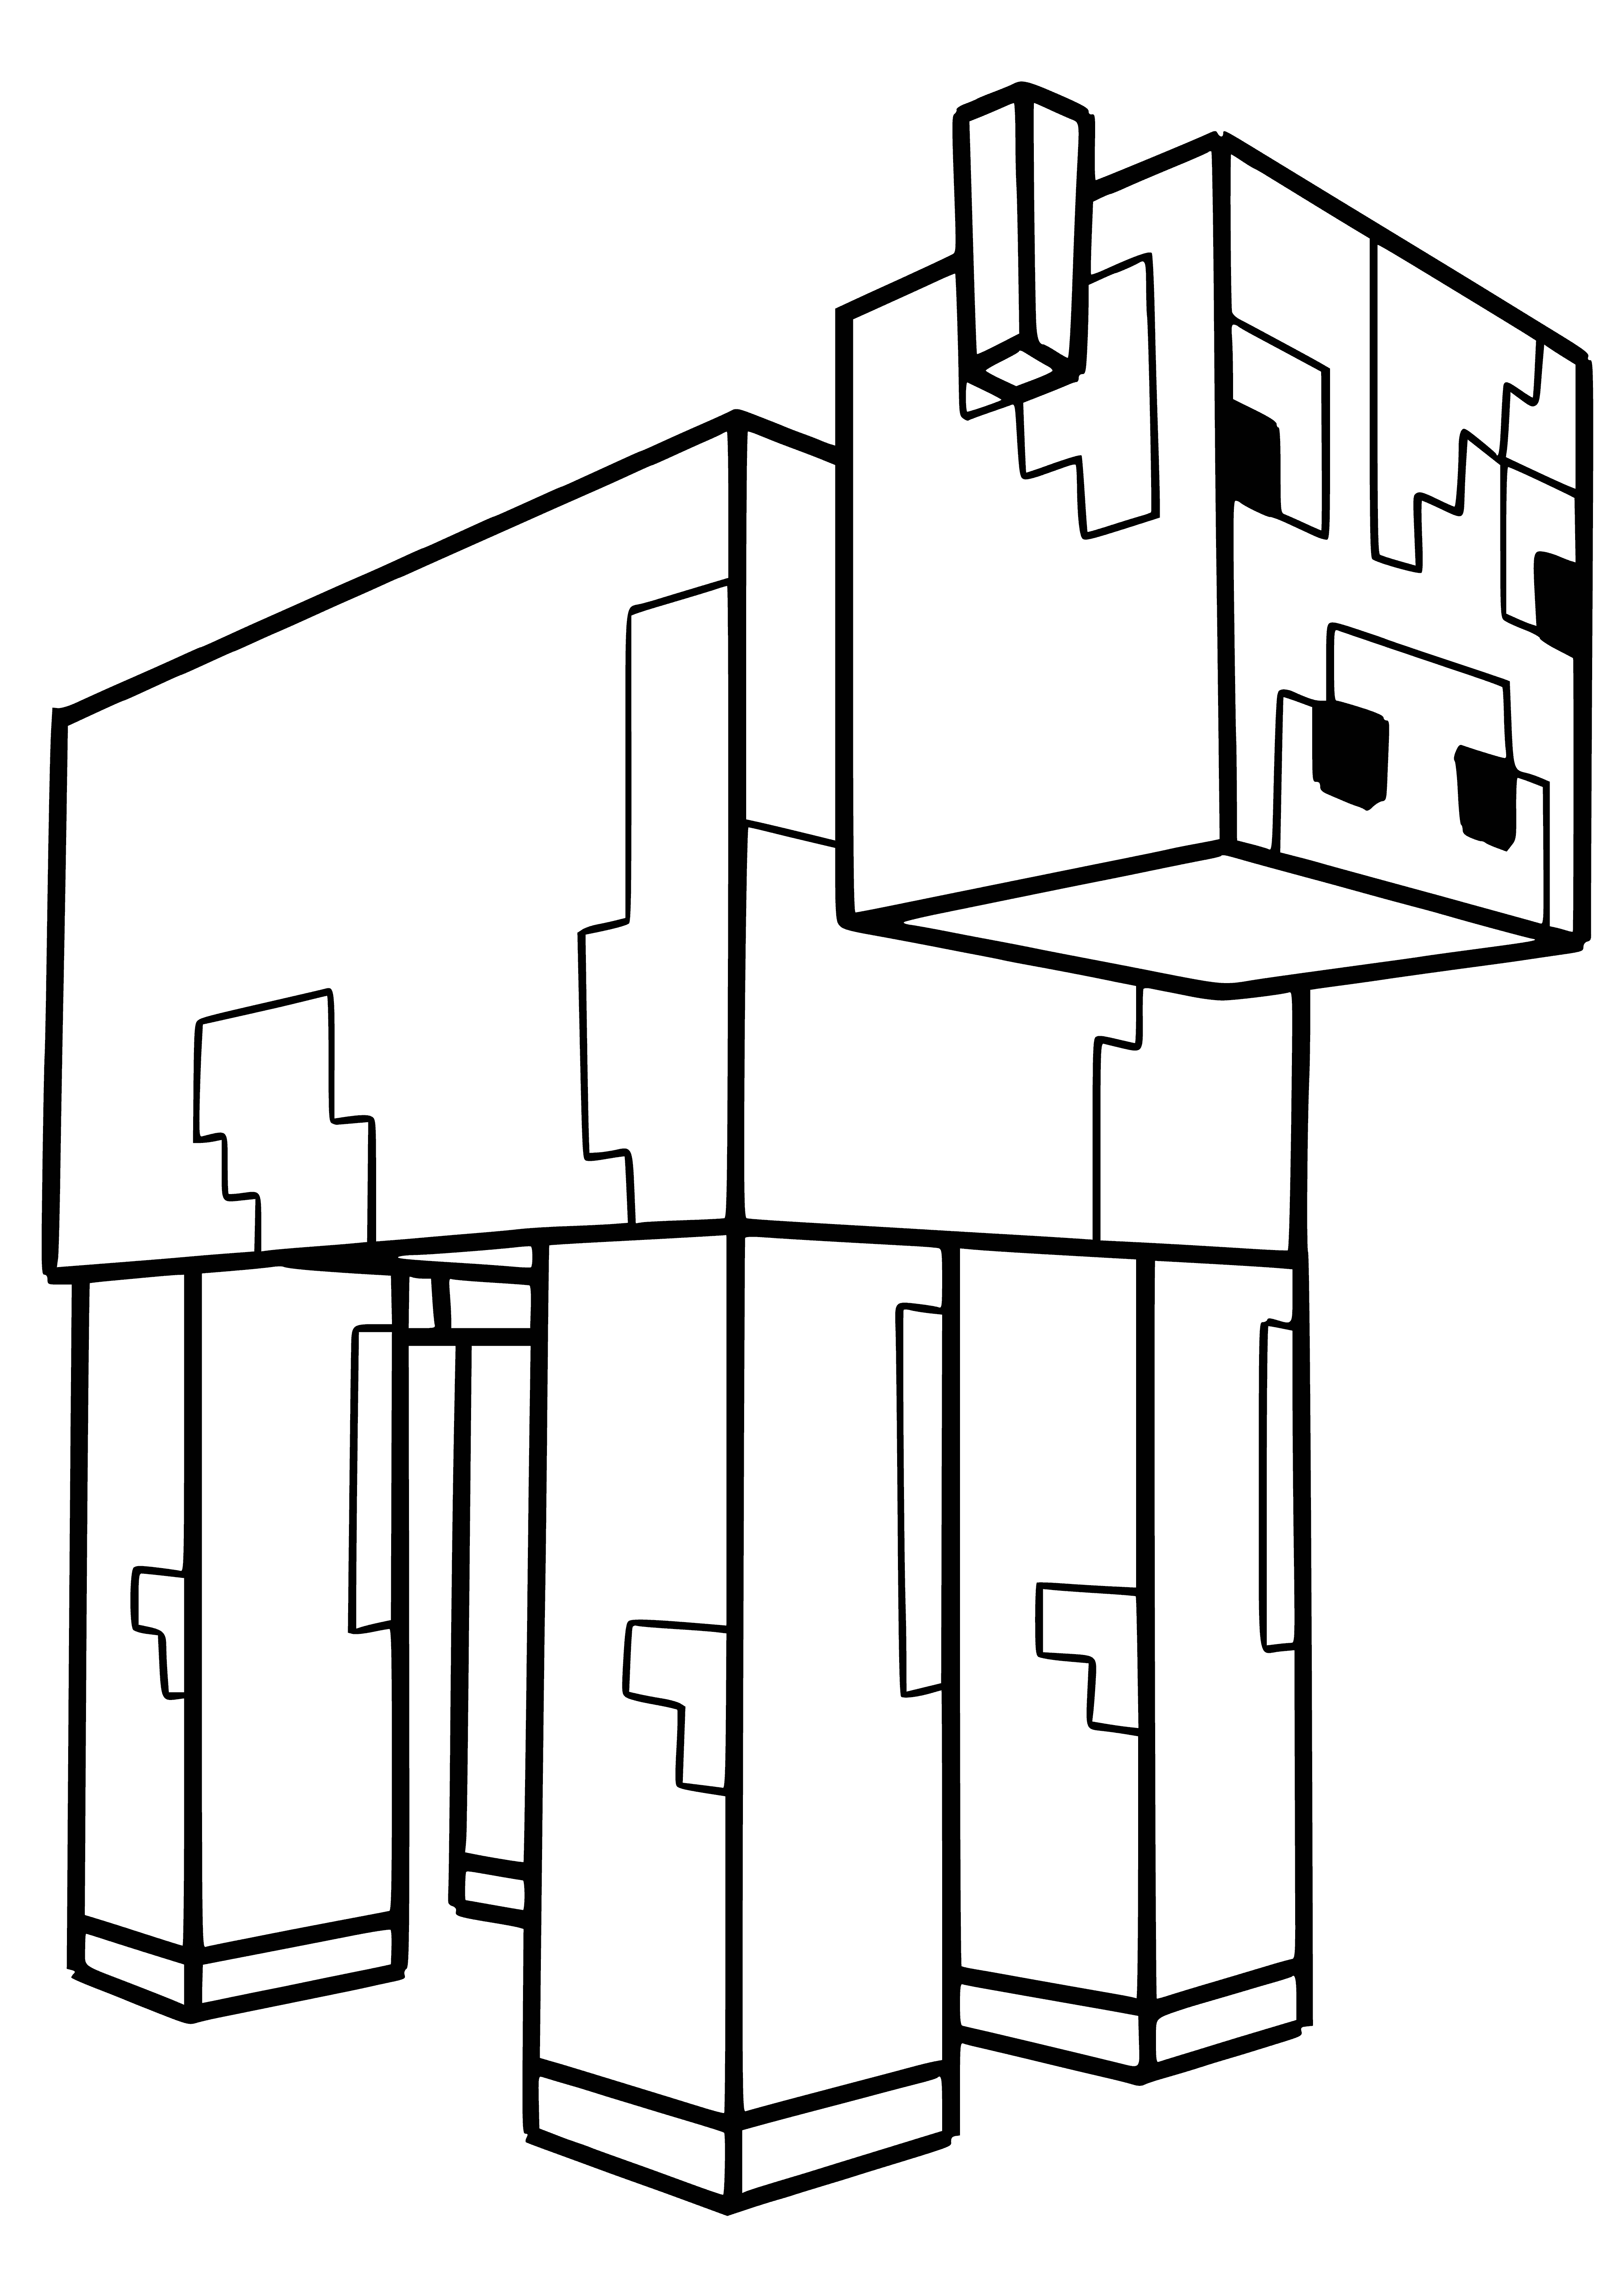 coloring page: Cow in Minecraft has 4 legs, brown/white fur, wide head, small eyes, sloped body, long tail.